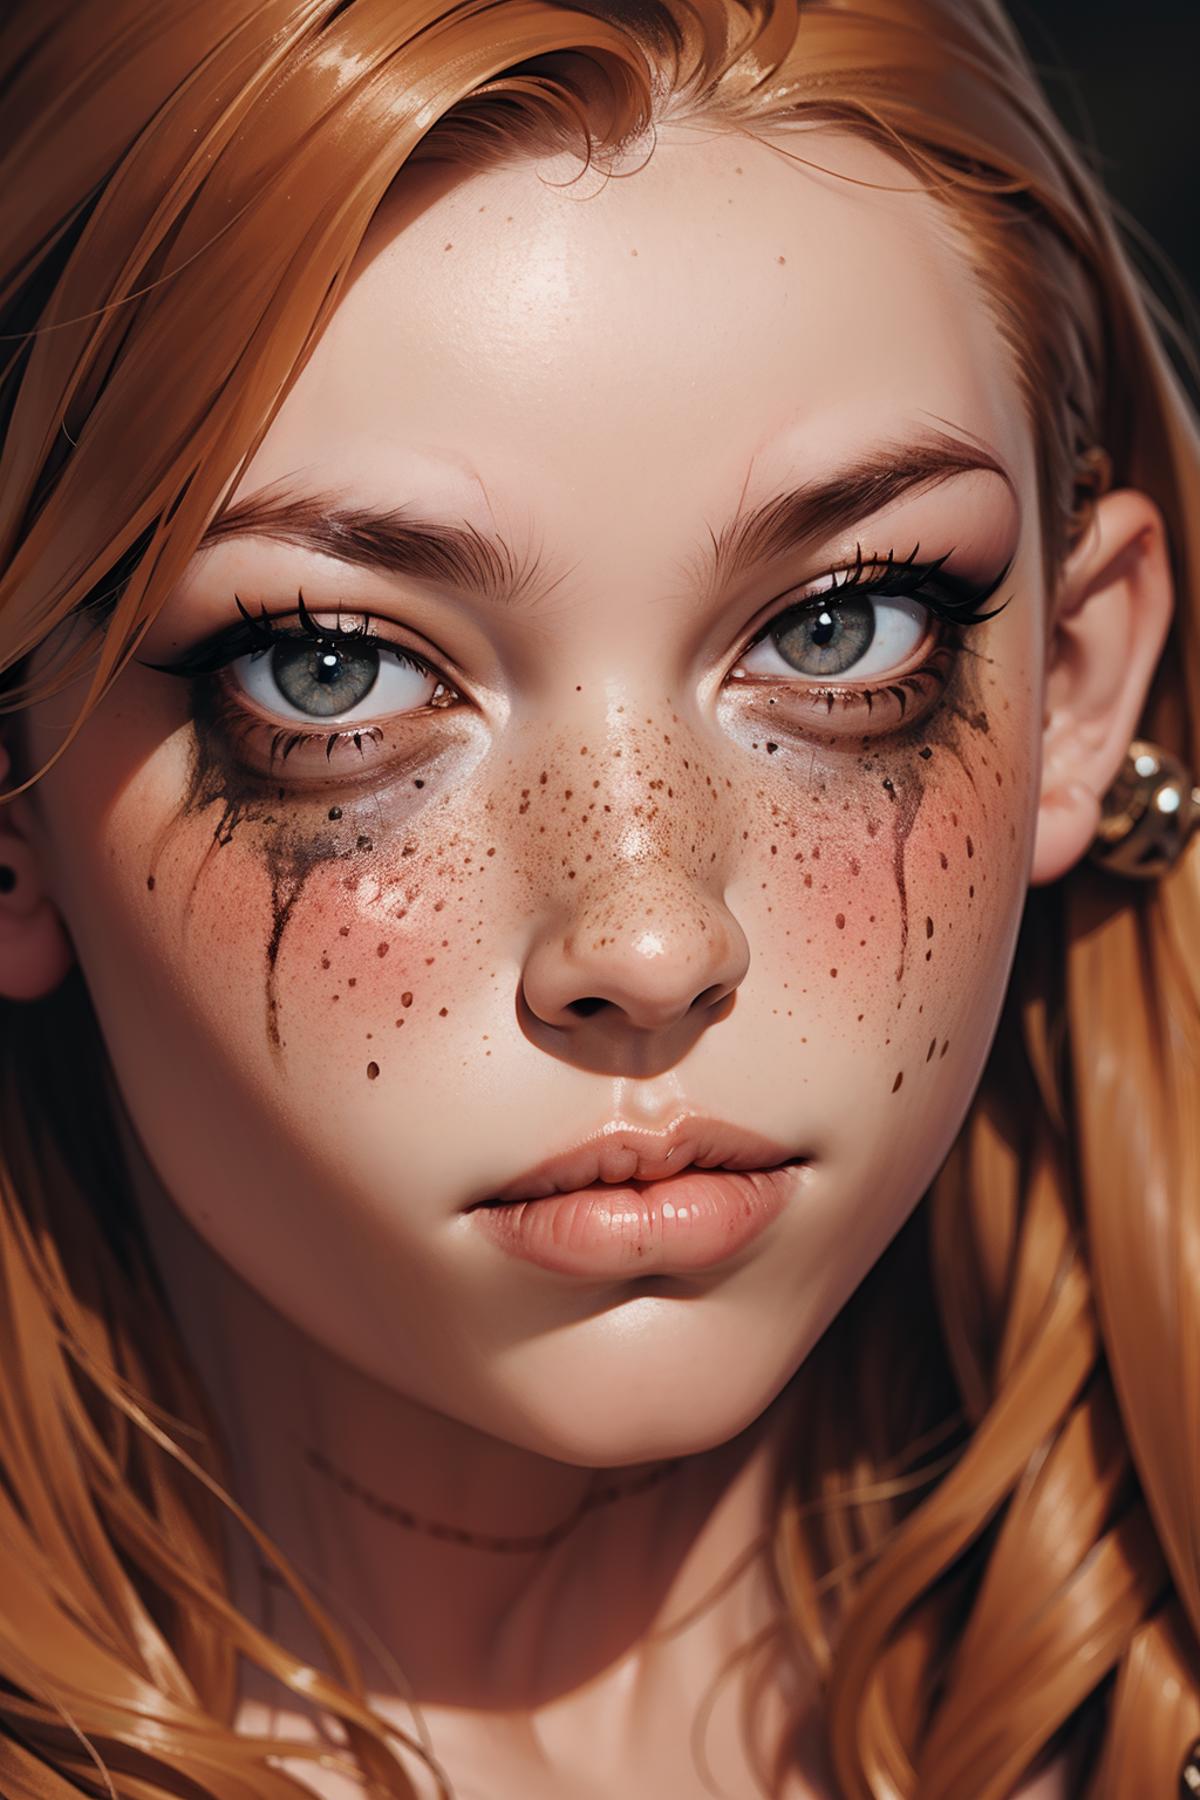 Ruined Makeup/Mascara Tears image by freckledvixon